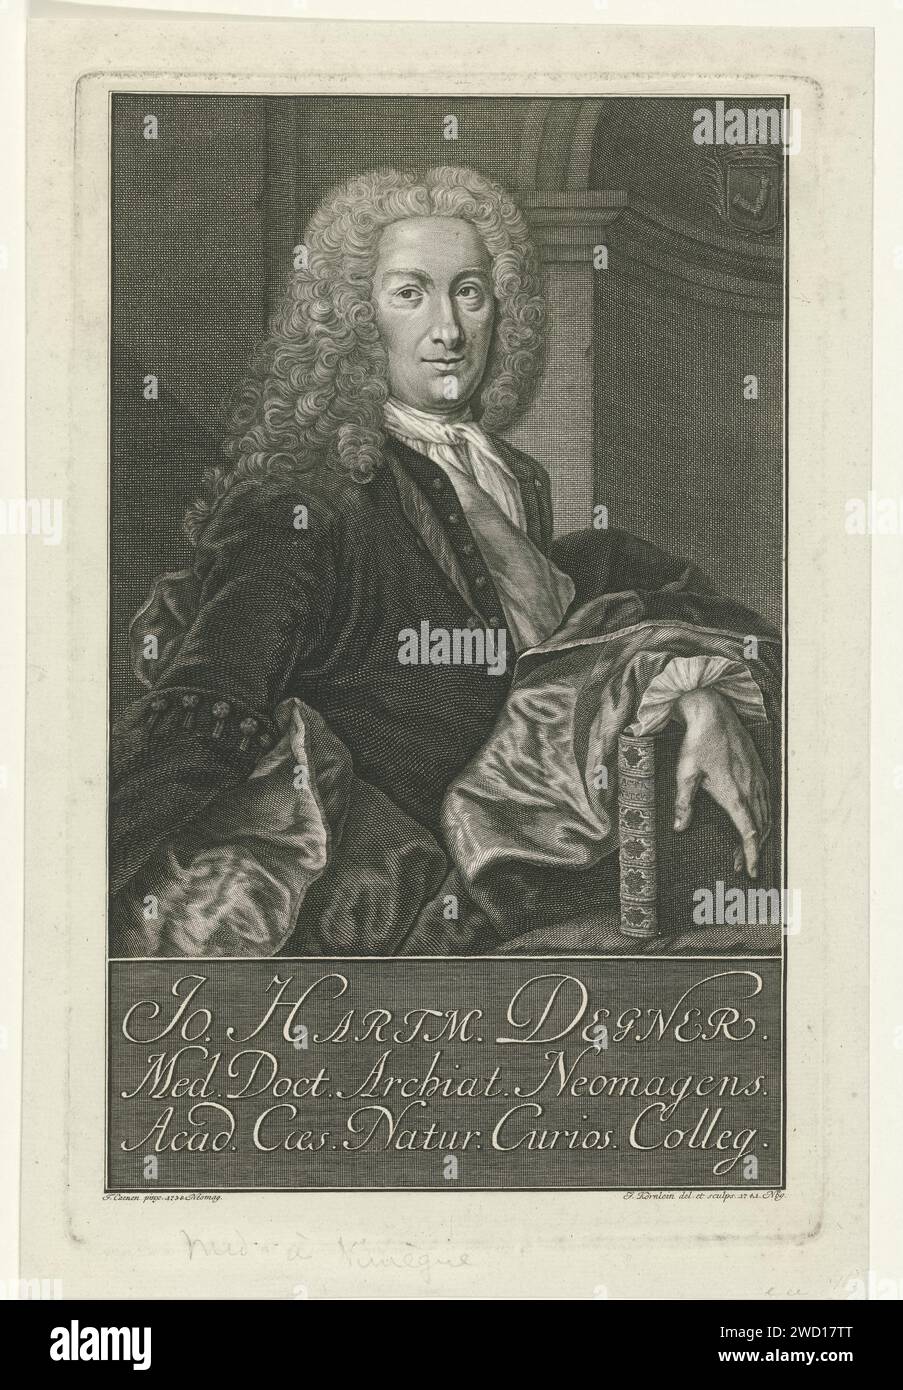 Portrait of Jan Hartmann Degner, Johannes Körnlein, After Theodorus Caenen, 1741 print Portrait at half to the right of Jan Hartmann Degner, doctor in Nijmegen. Degner is wearing a wig and has laid his left hand over a book. On the right the family crest and in the margin a three -line text. Amsterdam paper engraving Stock Photo